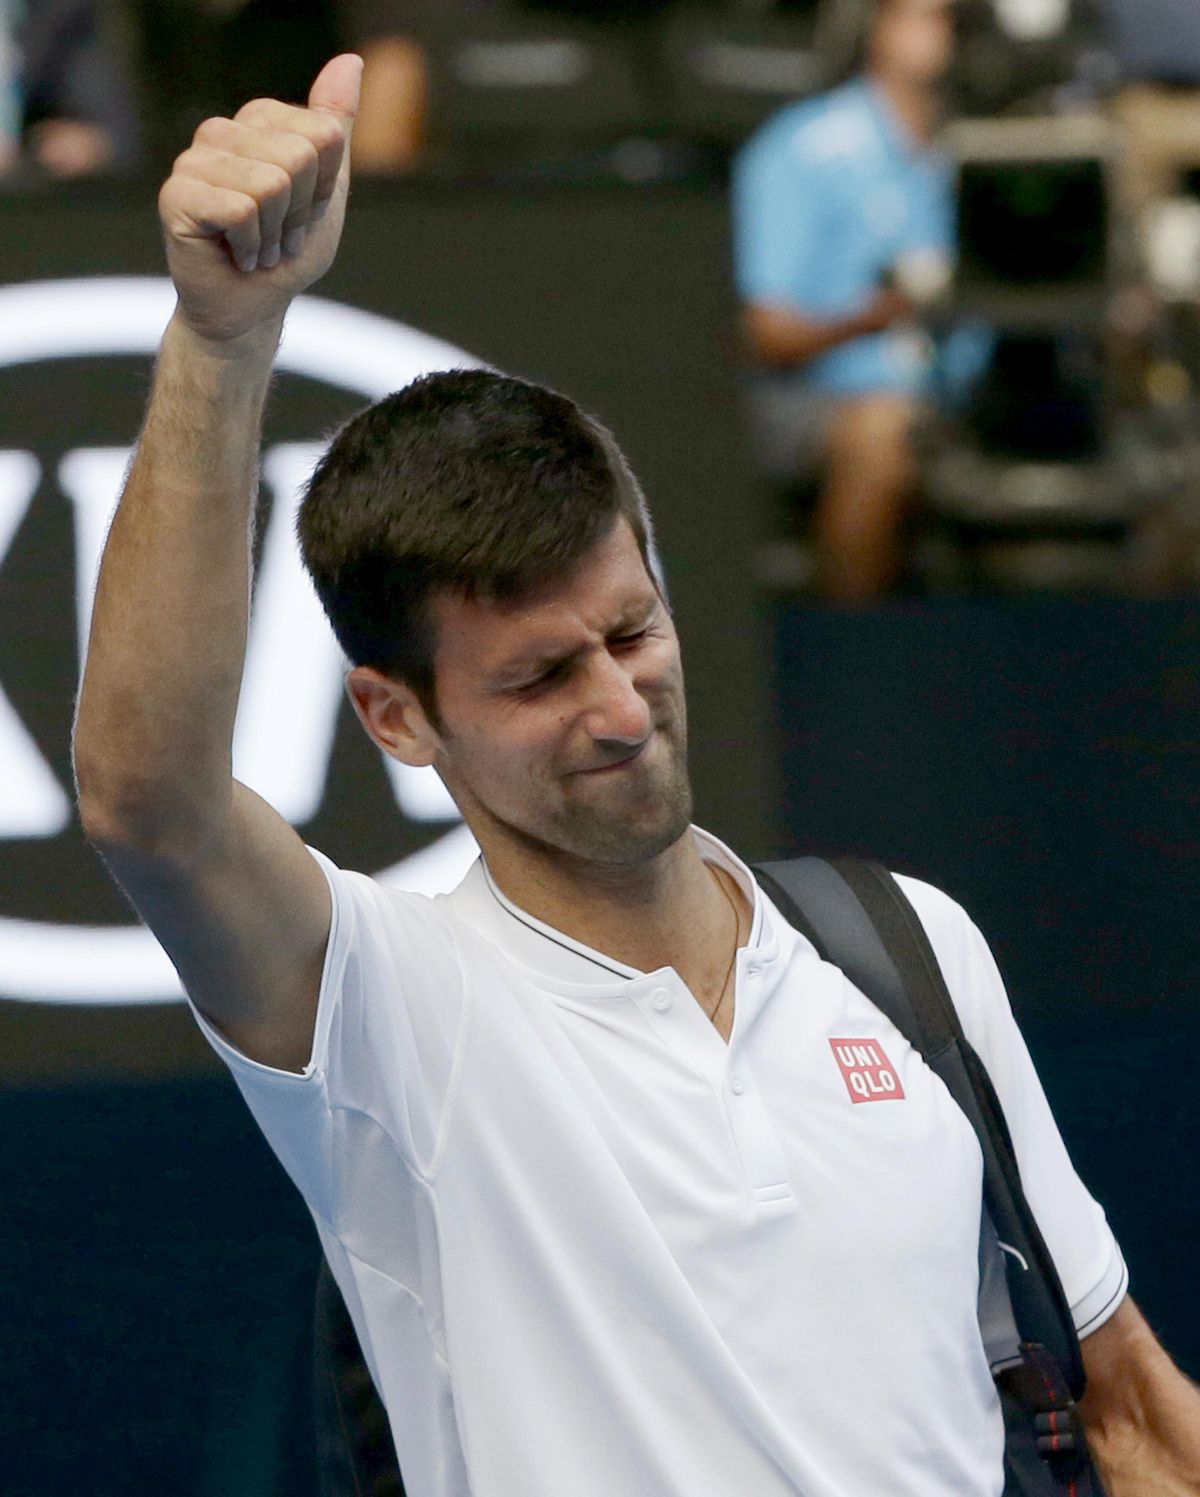 Serbia’s Novak Djokovic gestures to the crowd after losing to Uzbekistan’s Denis Istomin during their second round match at the Australian Open tennis championships in Melbourne, Australia, Thursday, Jan. 19, 2017. (Mark Baker / Associated Press)